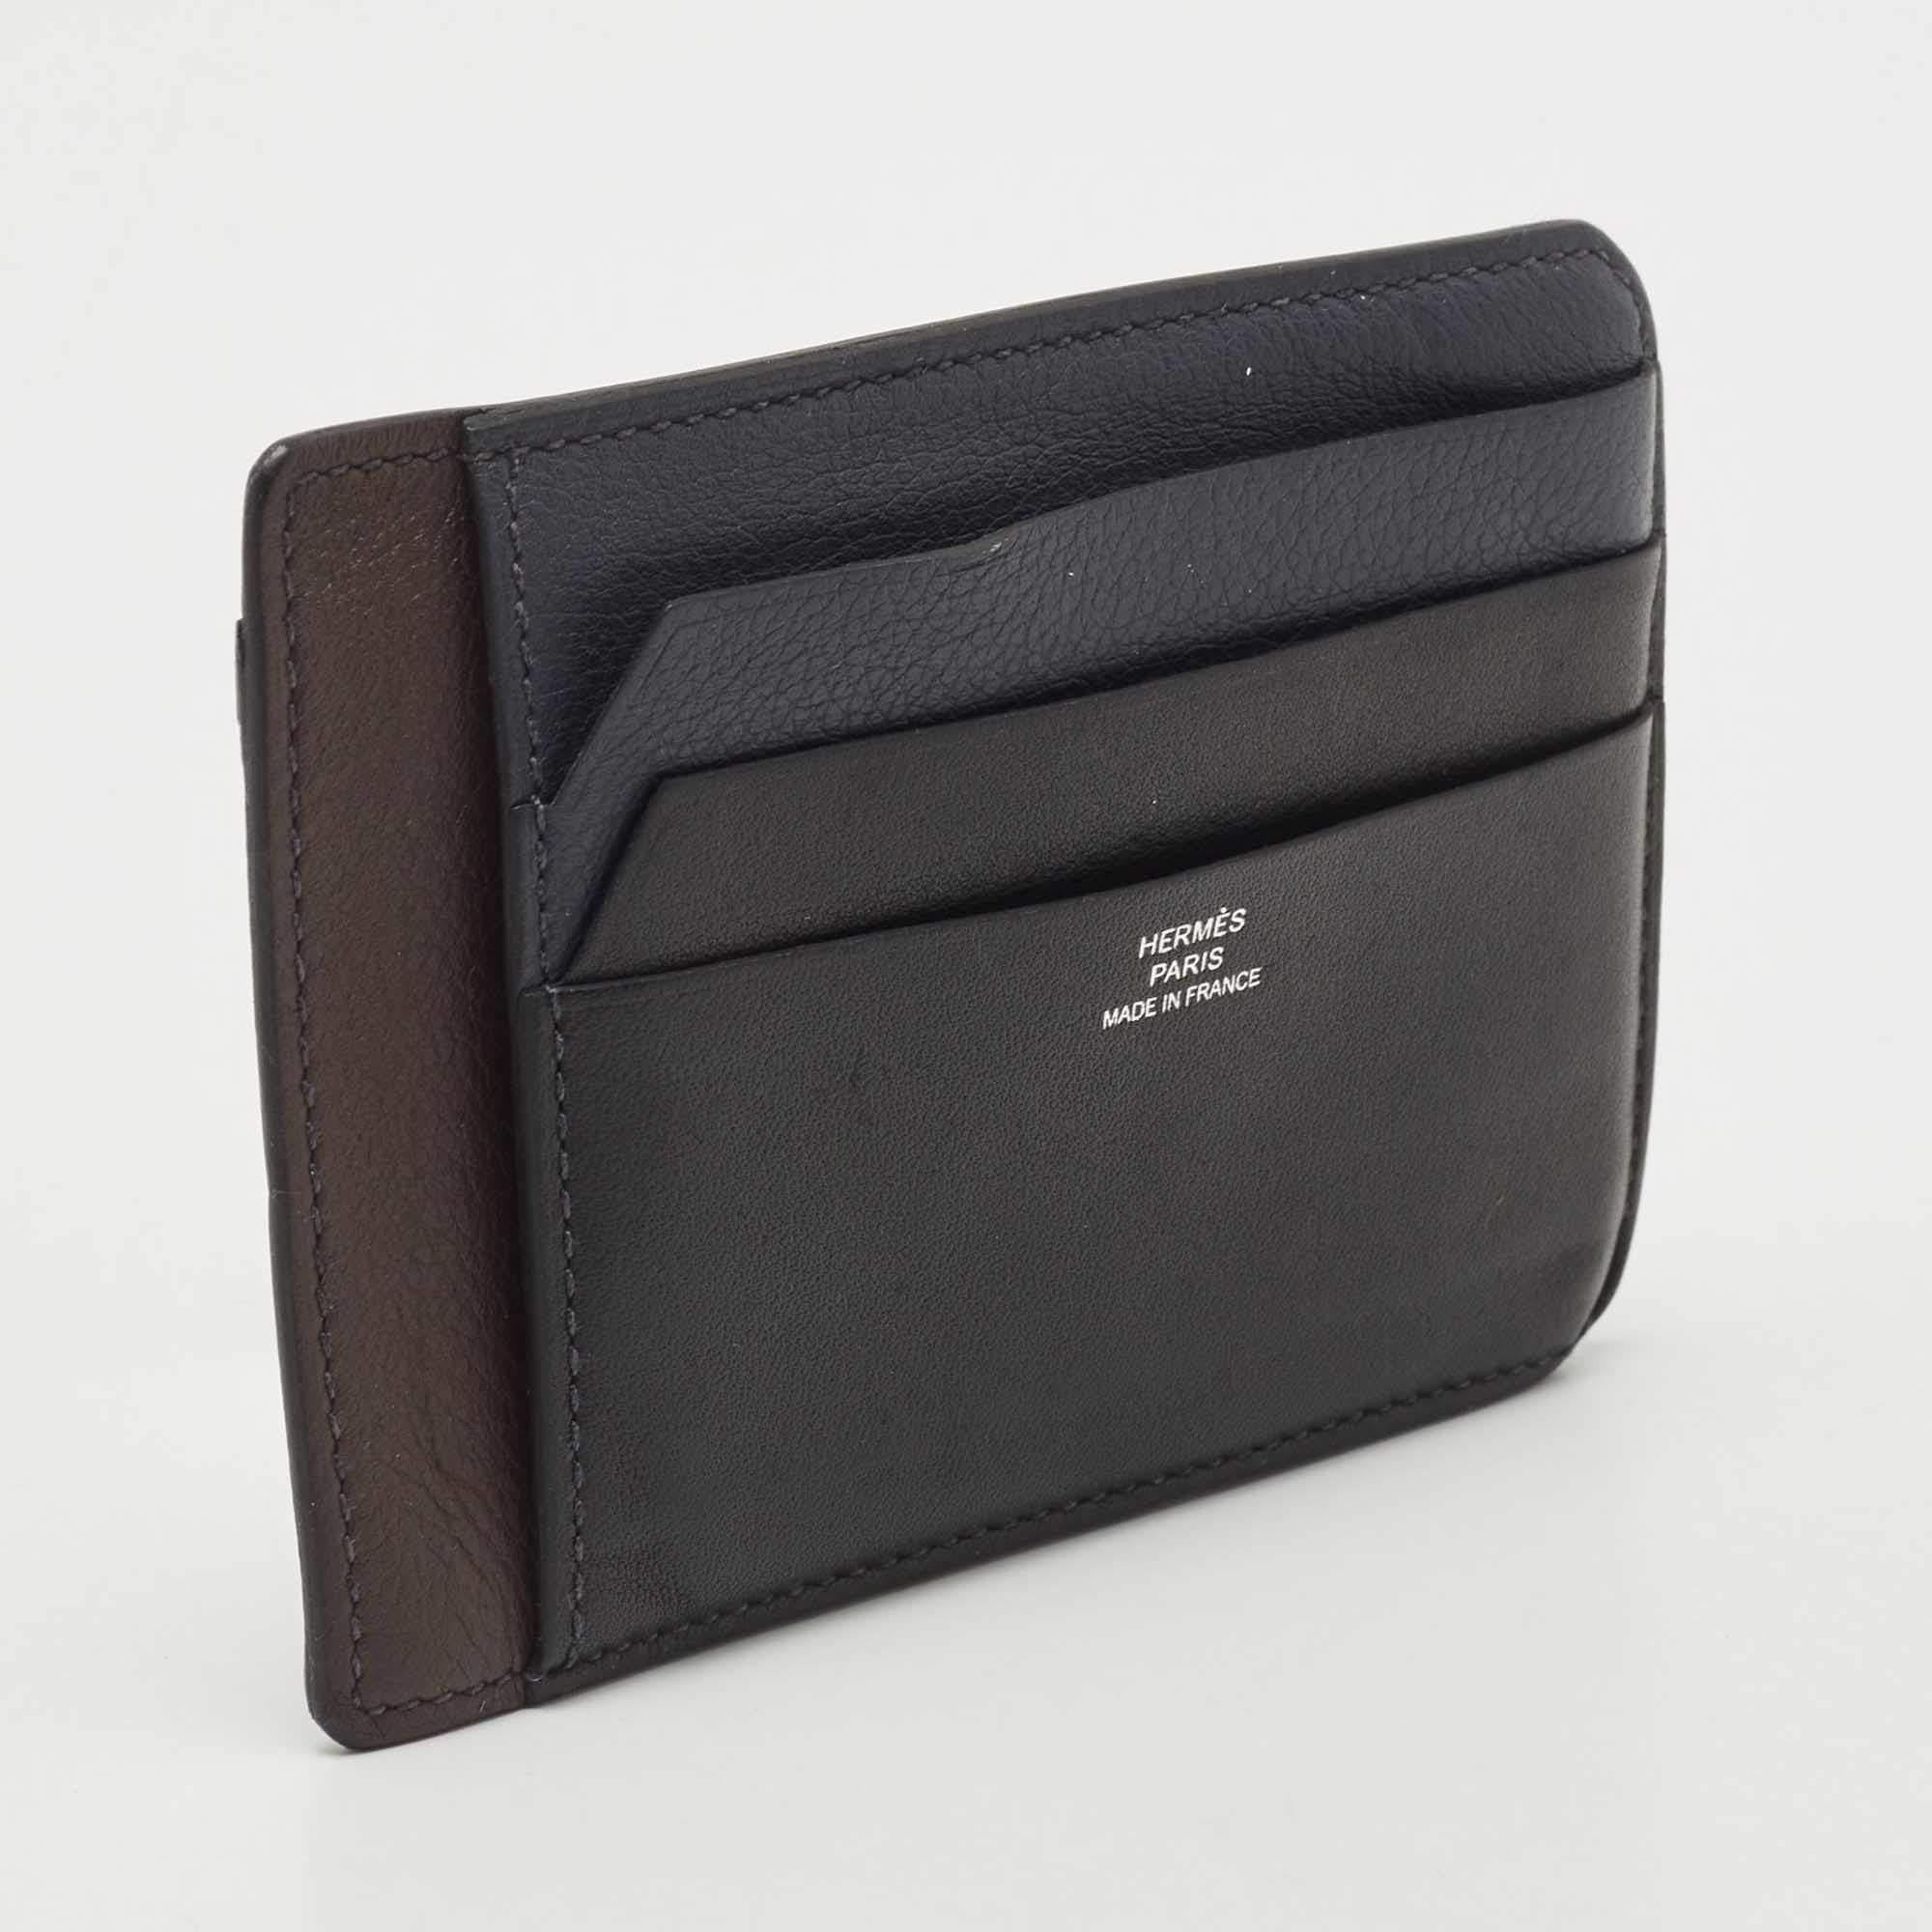 This cardholder by Hermés is a fine accessory. Crafted from leather, it comes with multiple slots to hold your cards. The brand's signature makes an appearance on the front.

